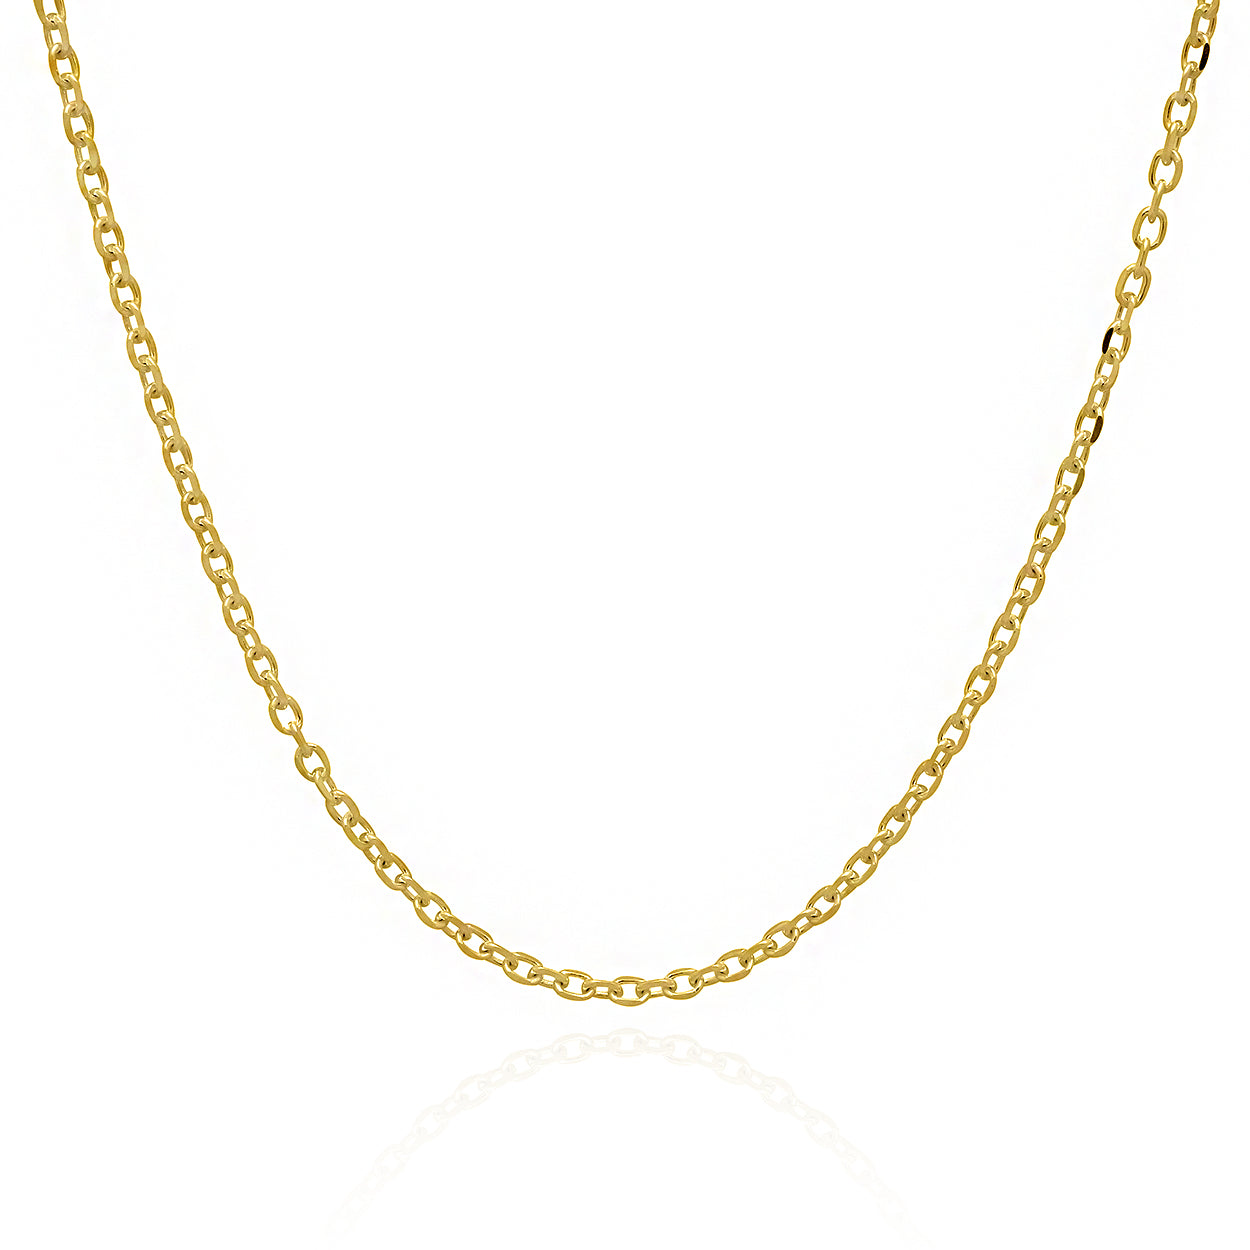 1.5mm Wide Rolo Style Chain Solid Gold Yellow